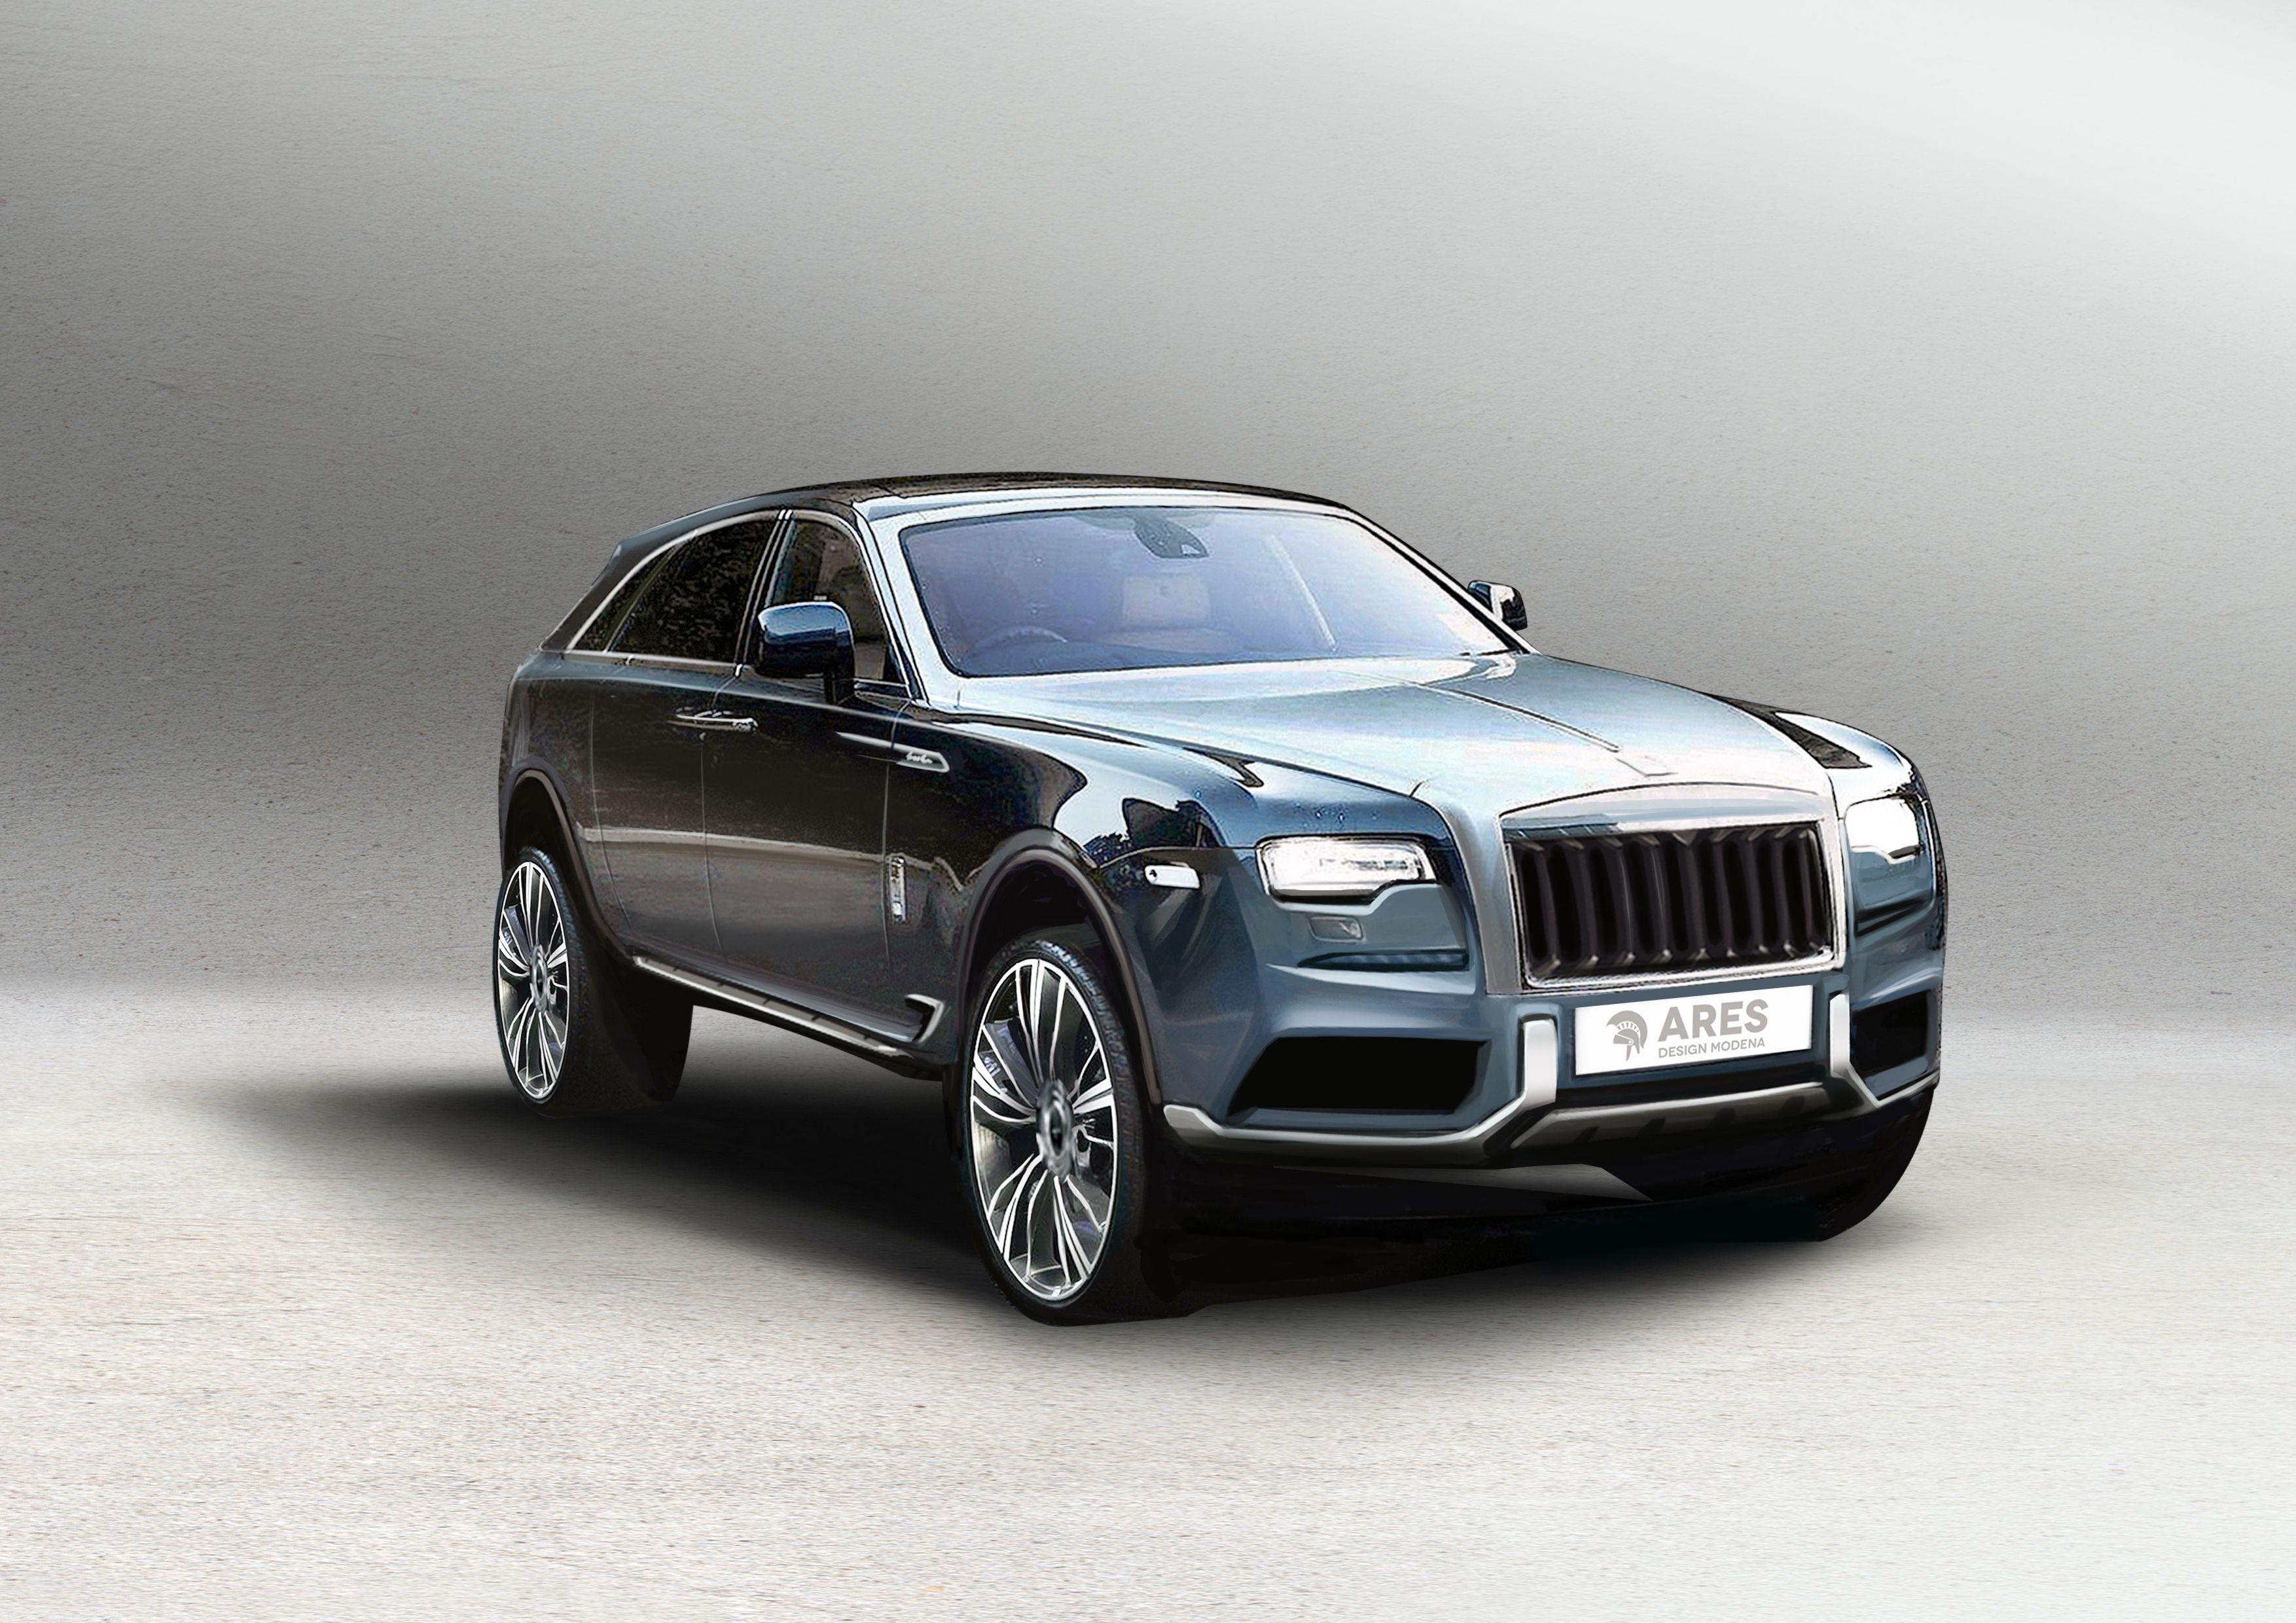 ARES Concept Rolls Royce Ghost II SUV Performance. If I Had